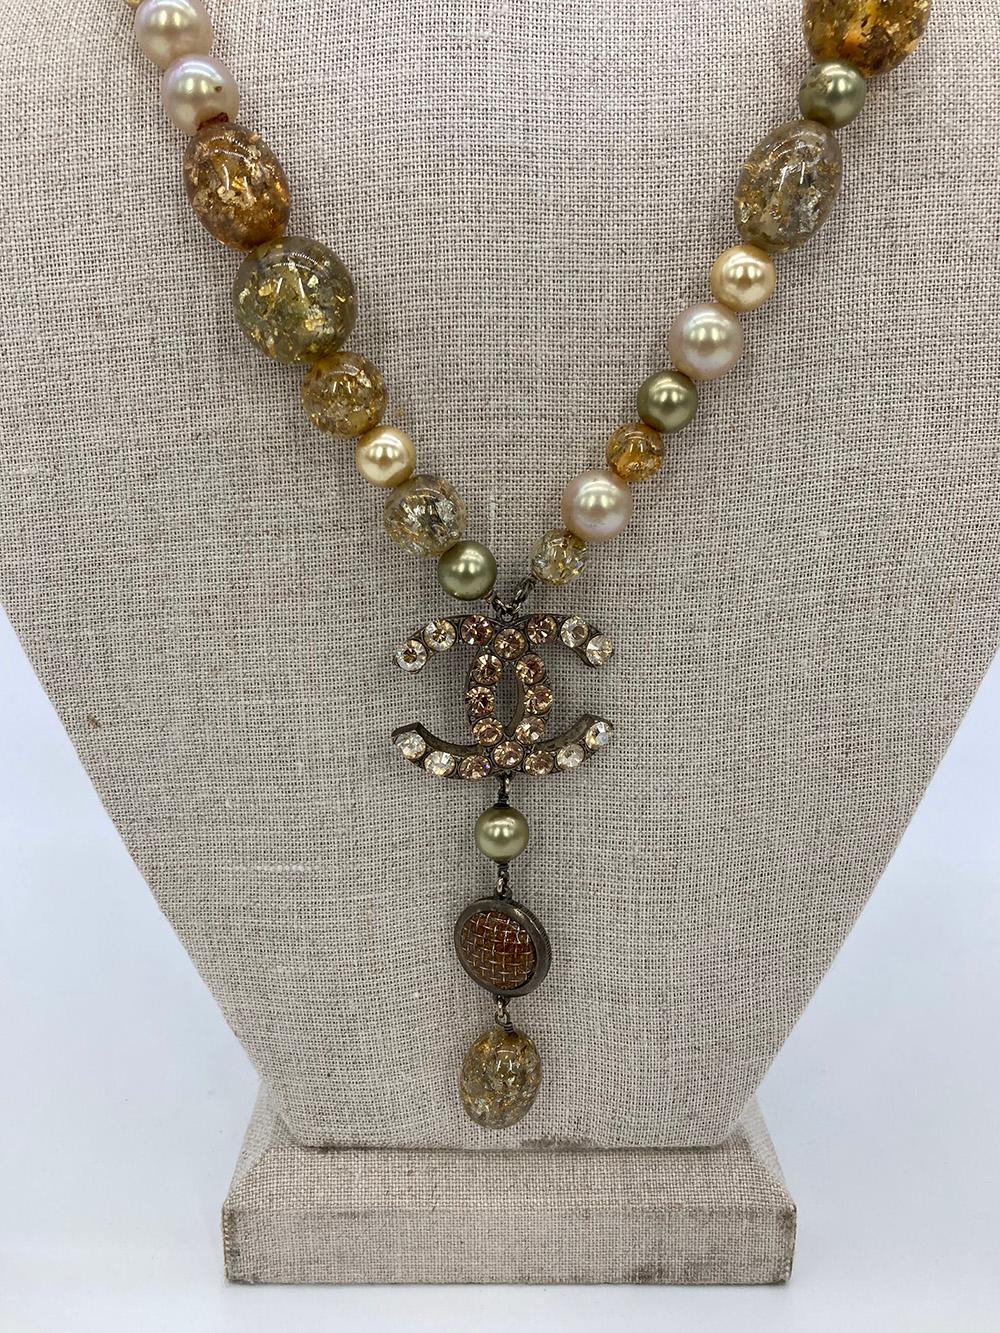 Vintage Chanel Rhinestone Beaded Pearl Necklace in excellent condition. Unique resin beads in gold, green, grey and orange with sparkling metallic flakes inside. Cream, tinted yellow and green pearls throughout to offset the resin beads. Main